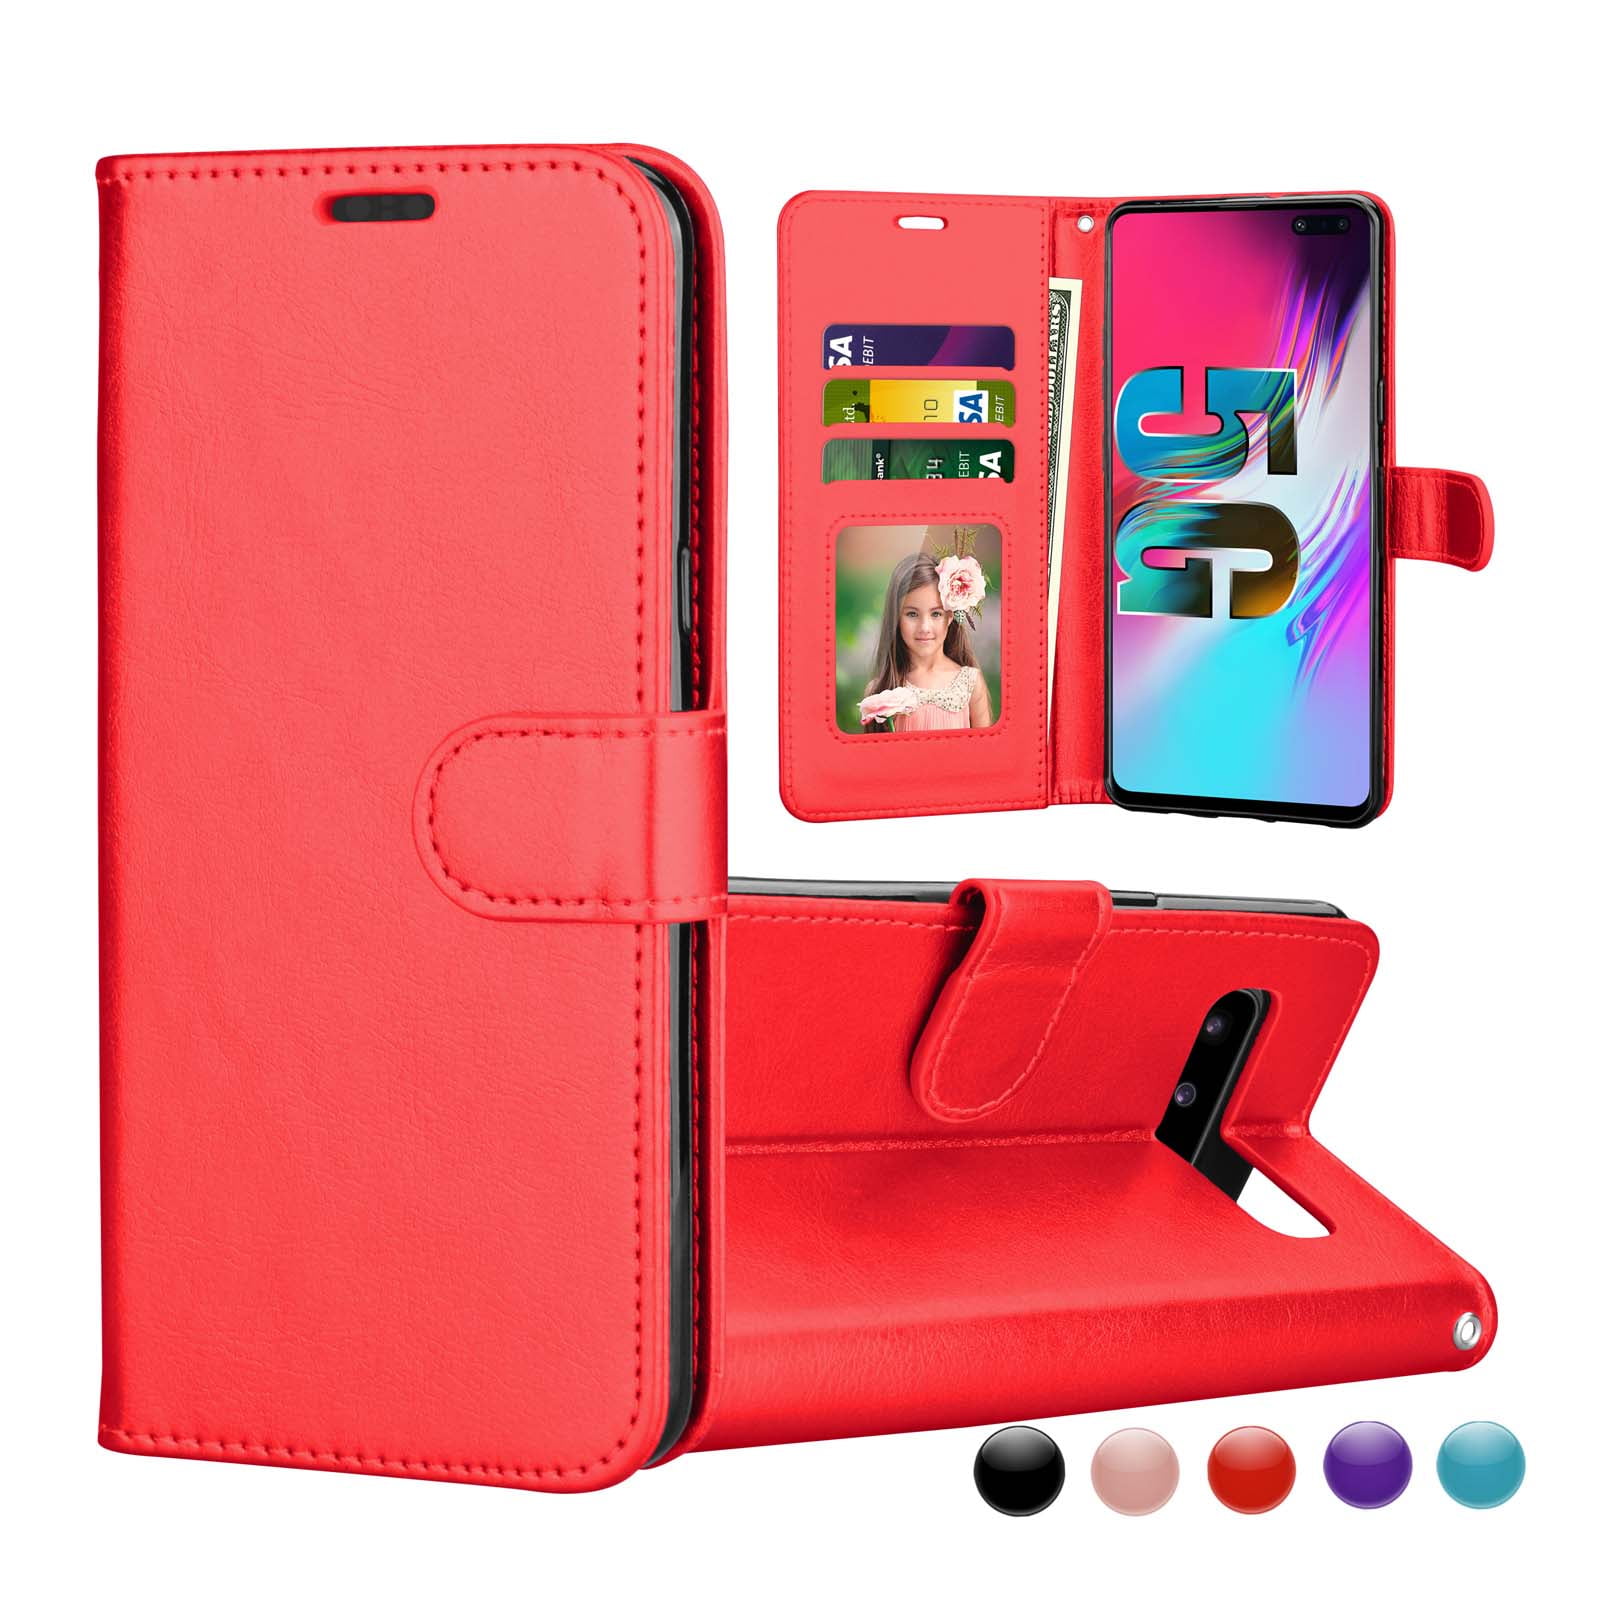 Samsung Galaxy S10 5G Case,Galaxy S10 5G Folio Wallet Case,Printed Design PU Leather Protective Phone Case Cover with Card Holder Slot Pocket Magnetic for Samsung Galaxy S10 5G,Lotus